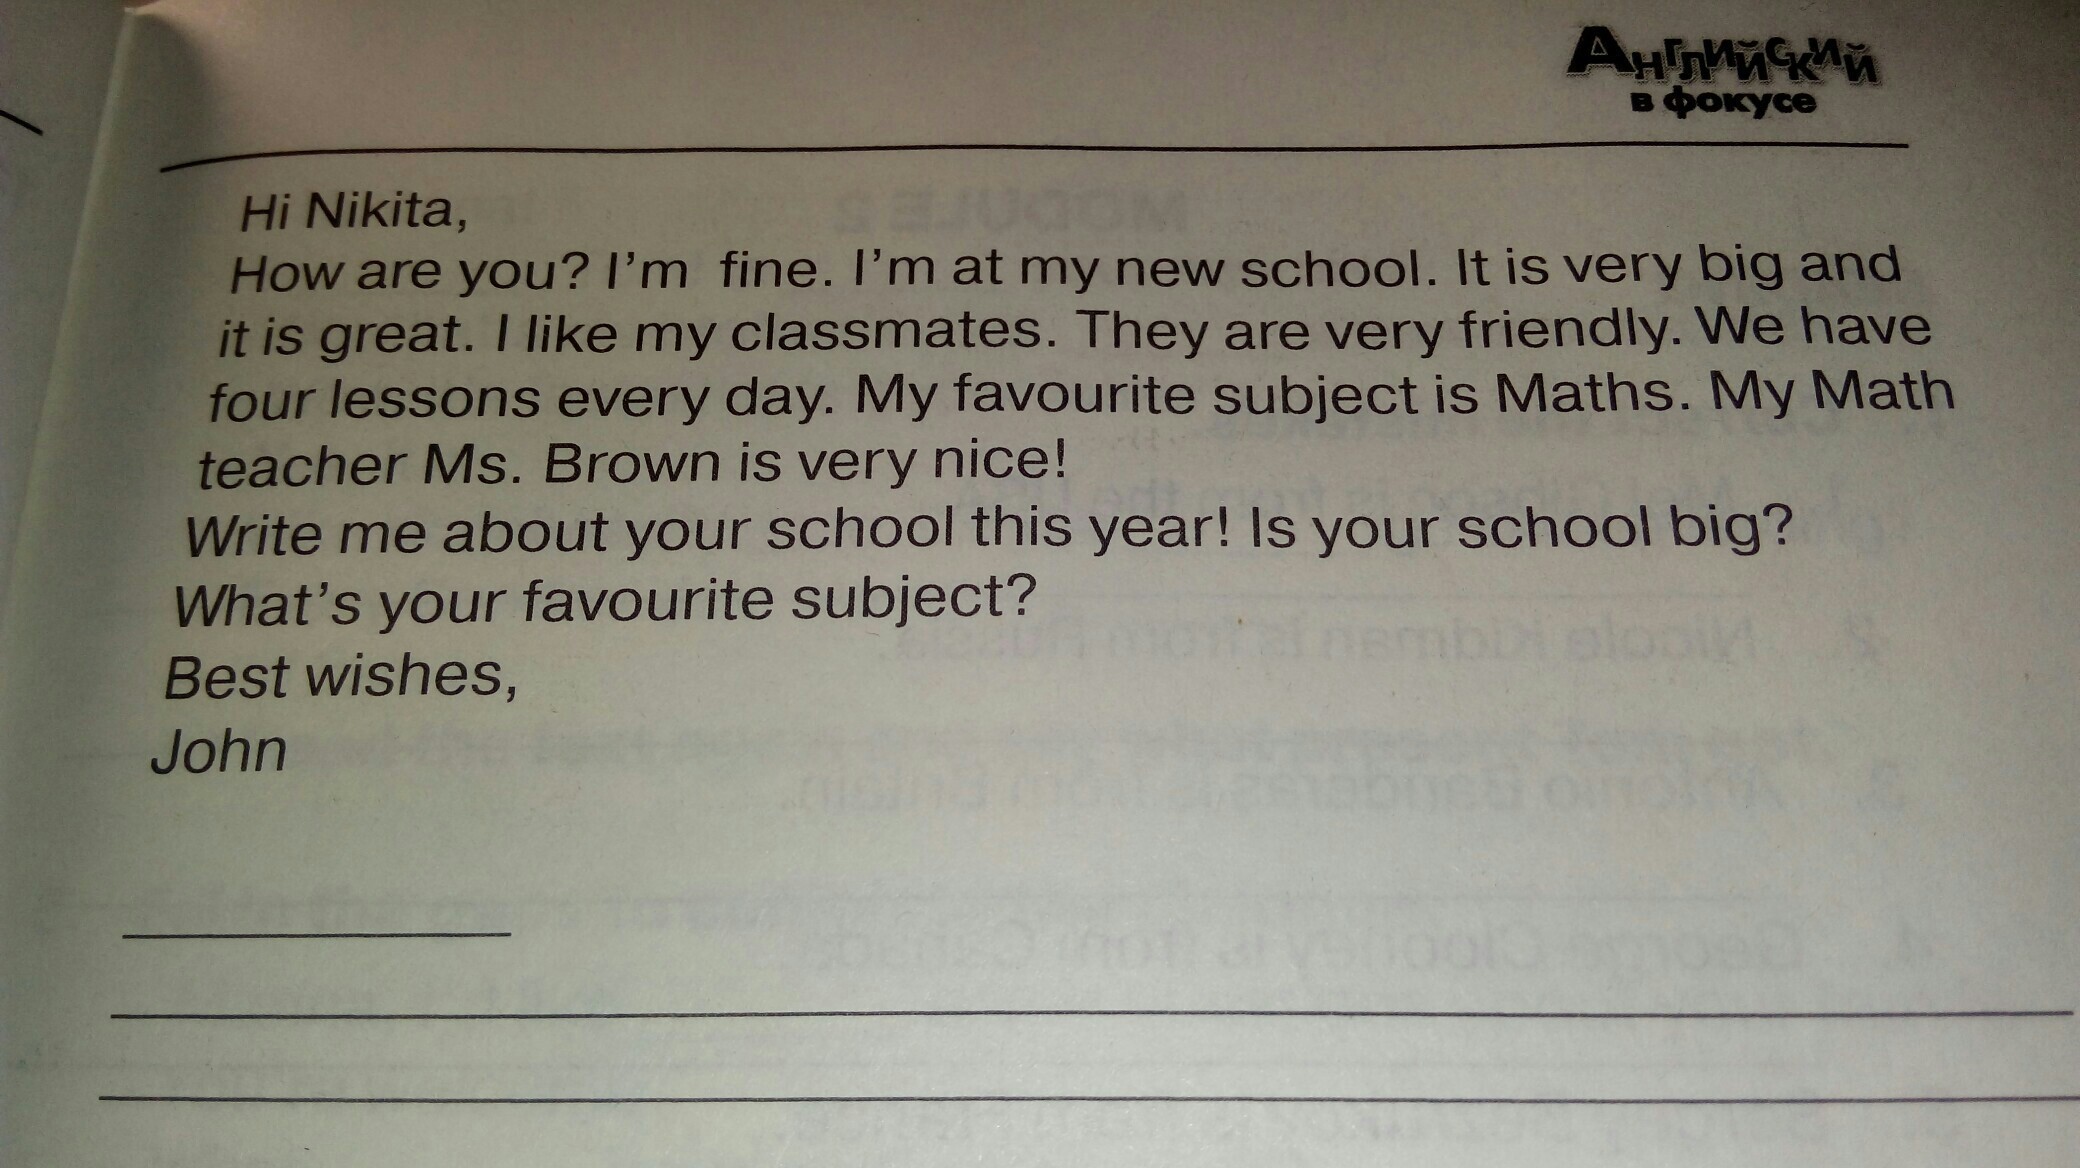 Write him a letter and answer his two questions about your school. 